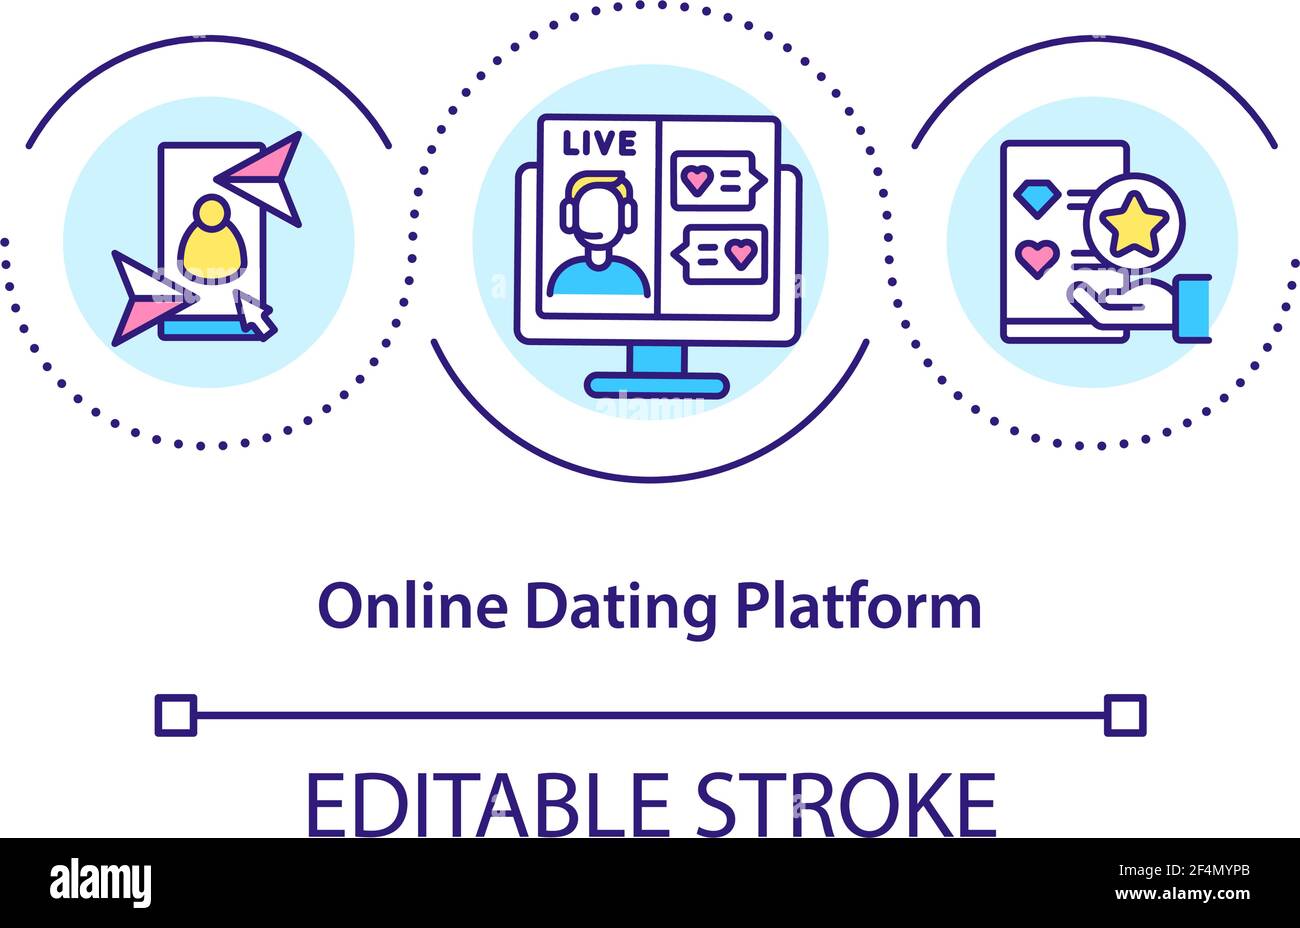 Online dating platform concept icon Stock Vector